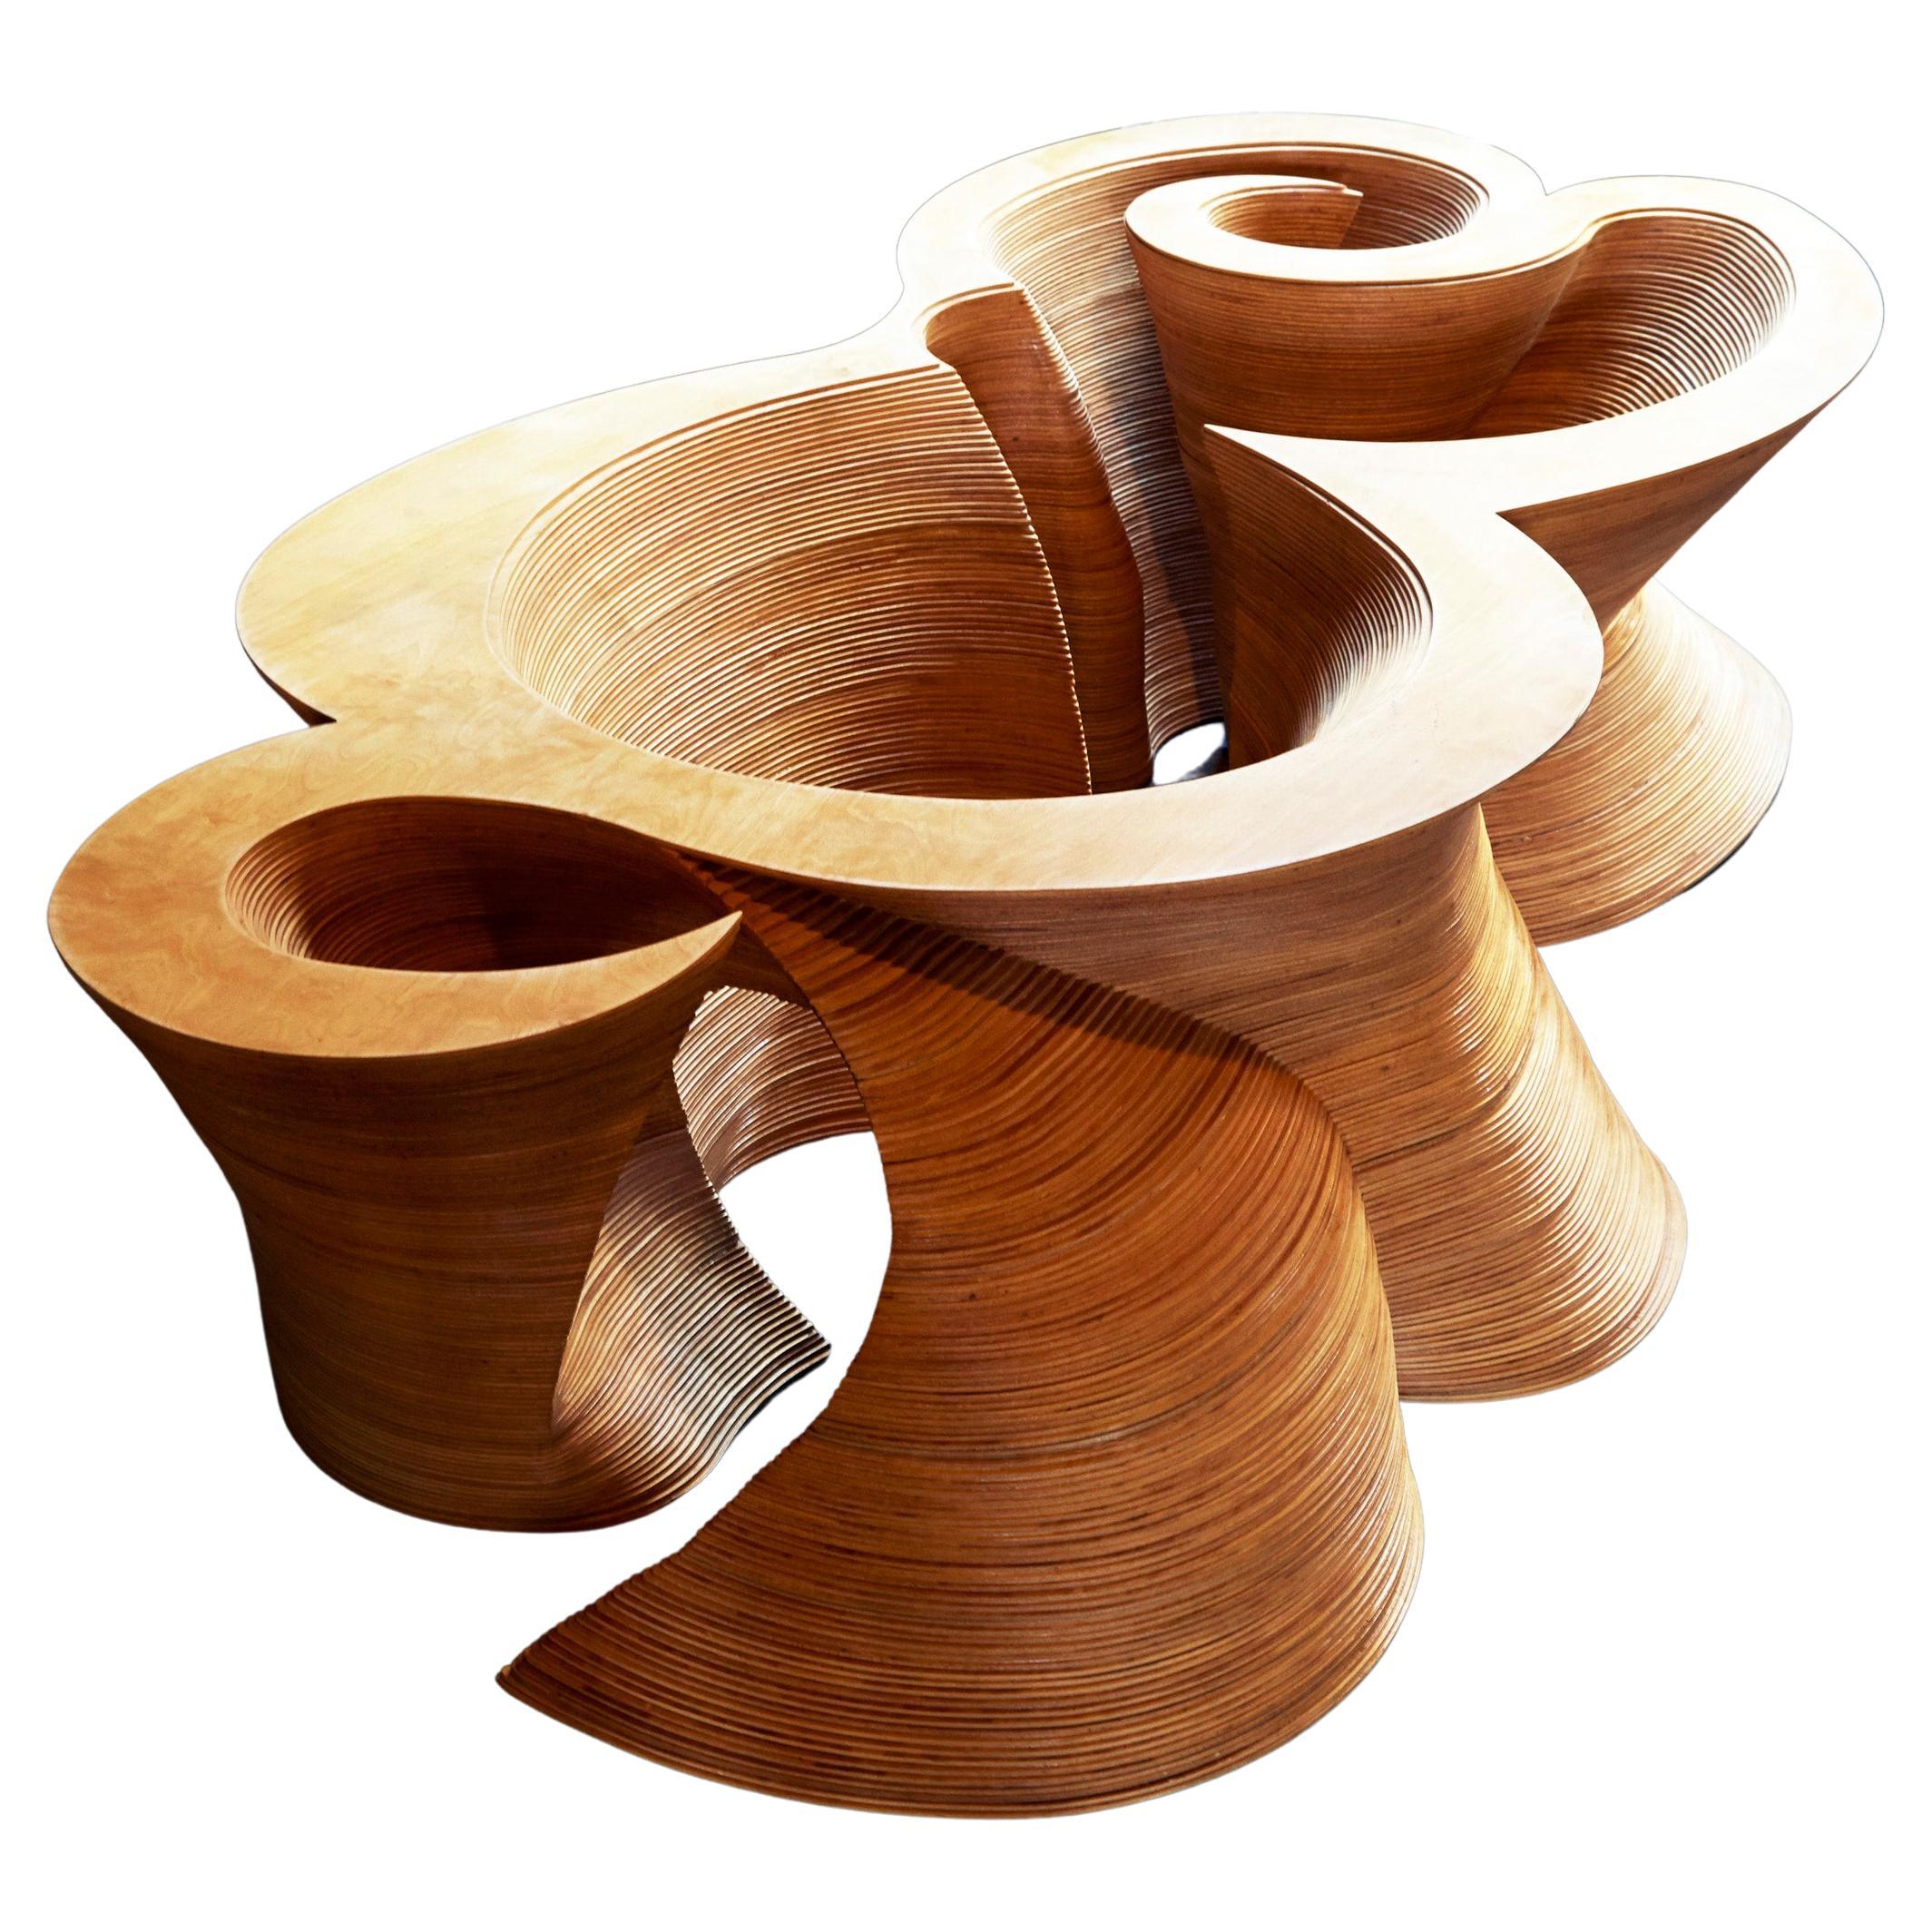 Luxury Organic Modern Coffee Table, Furniture Sculpture, High End Wood Art For Sale